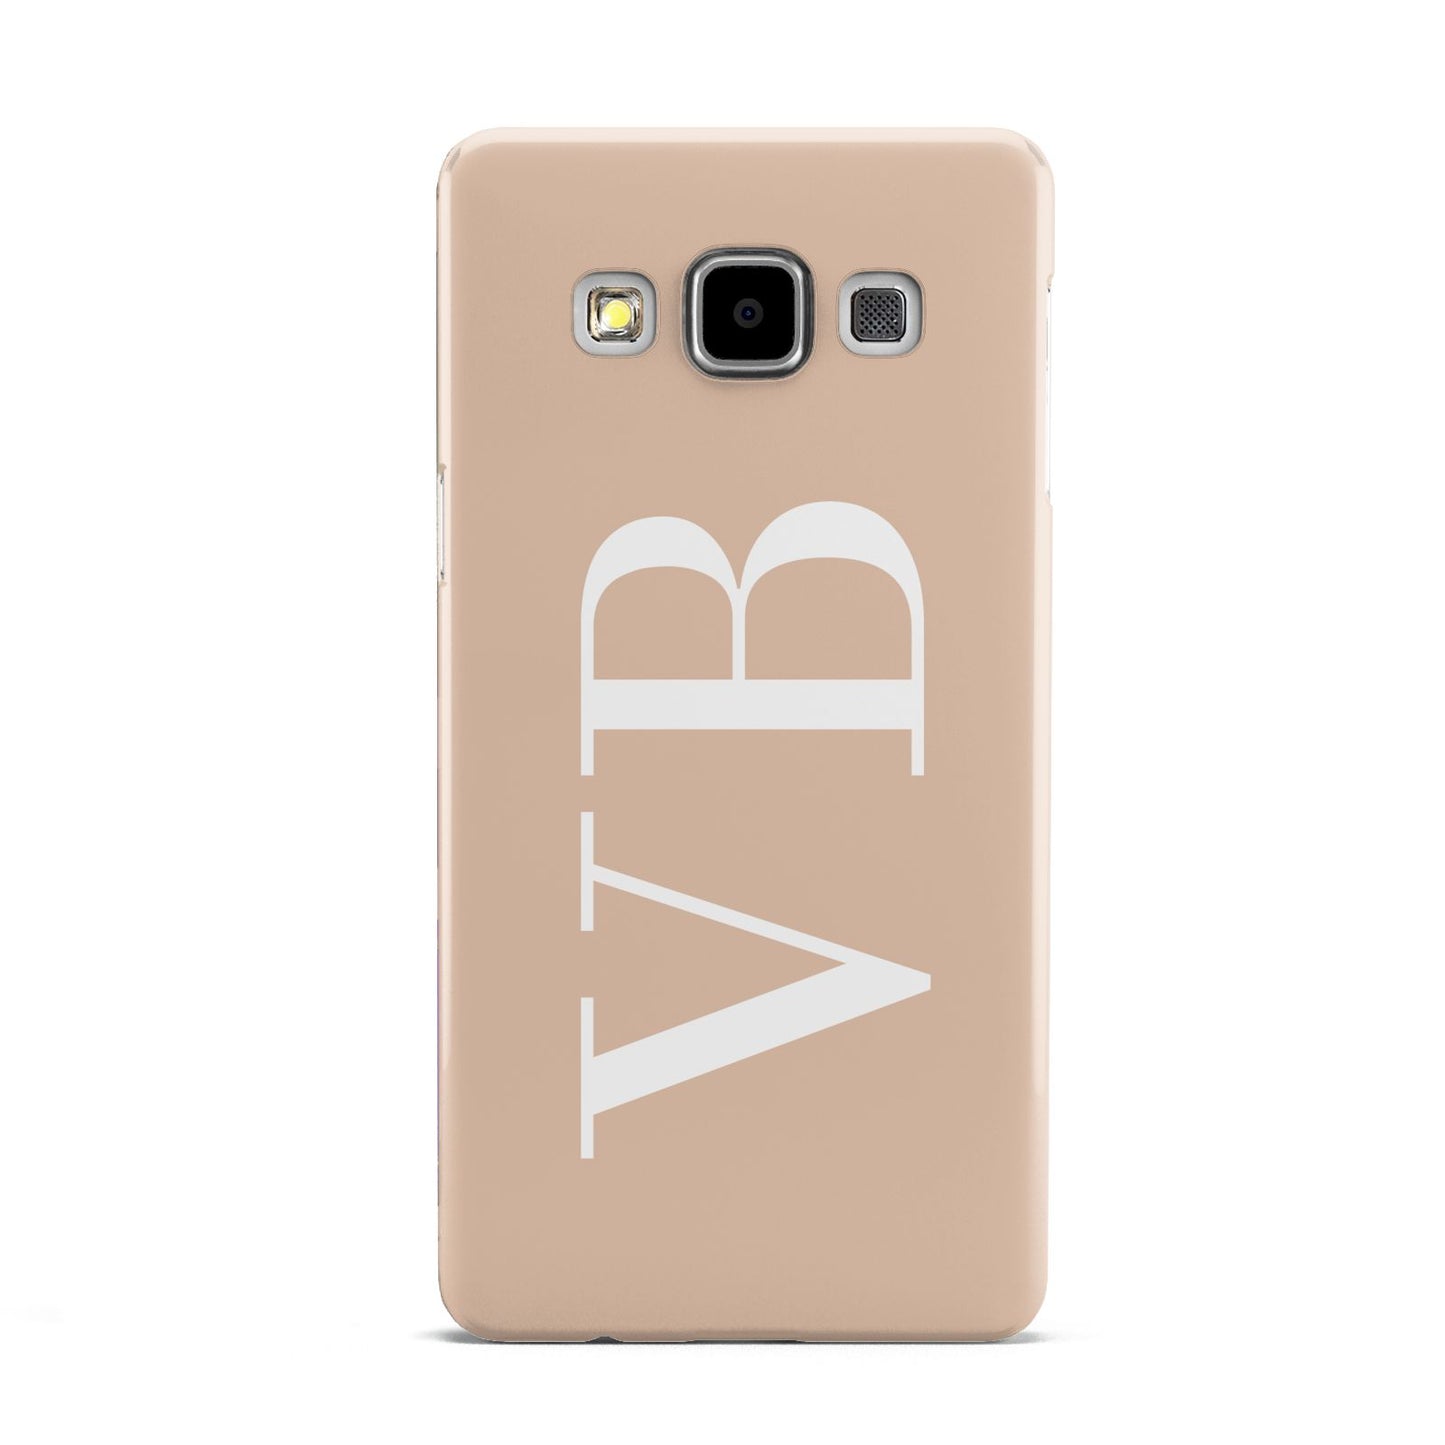 Nude And White Personalised Samsung Galaxy A5 Case